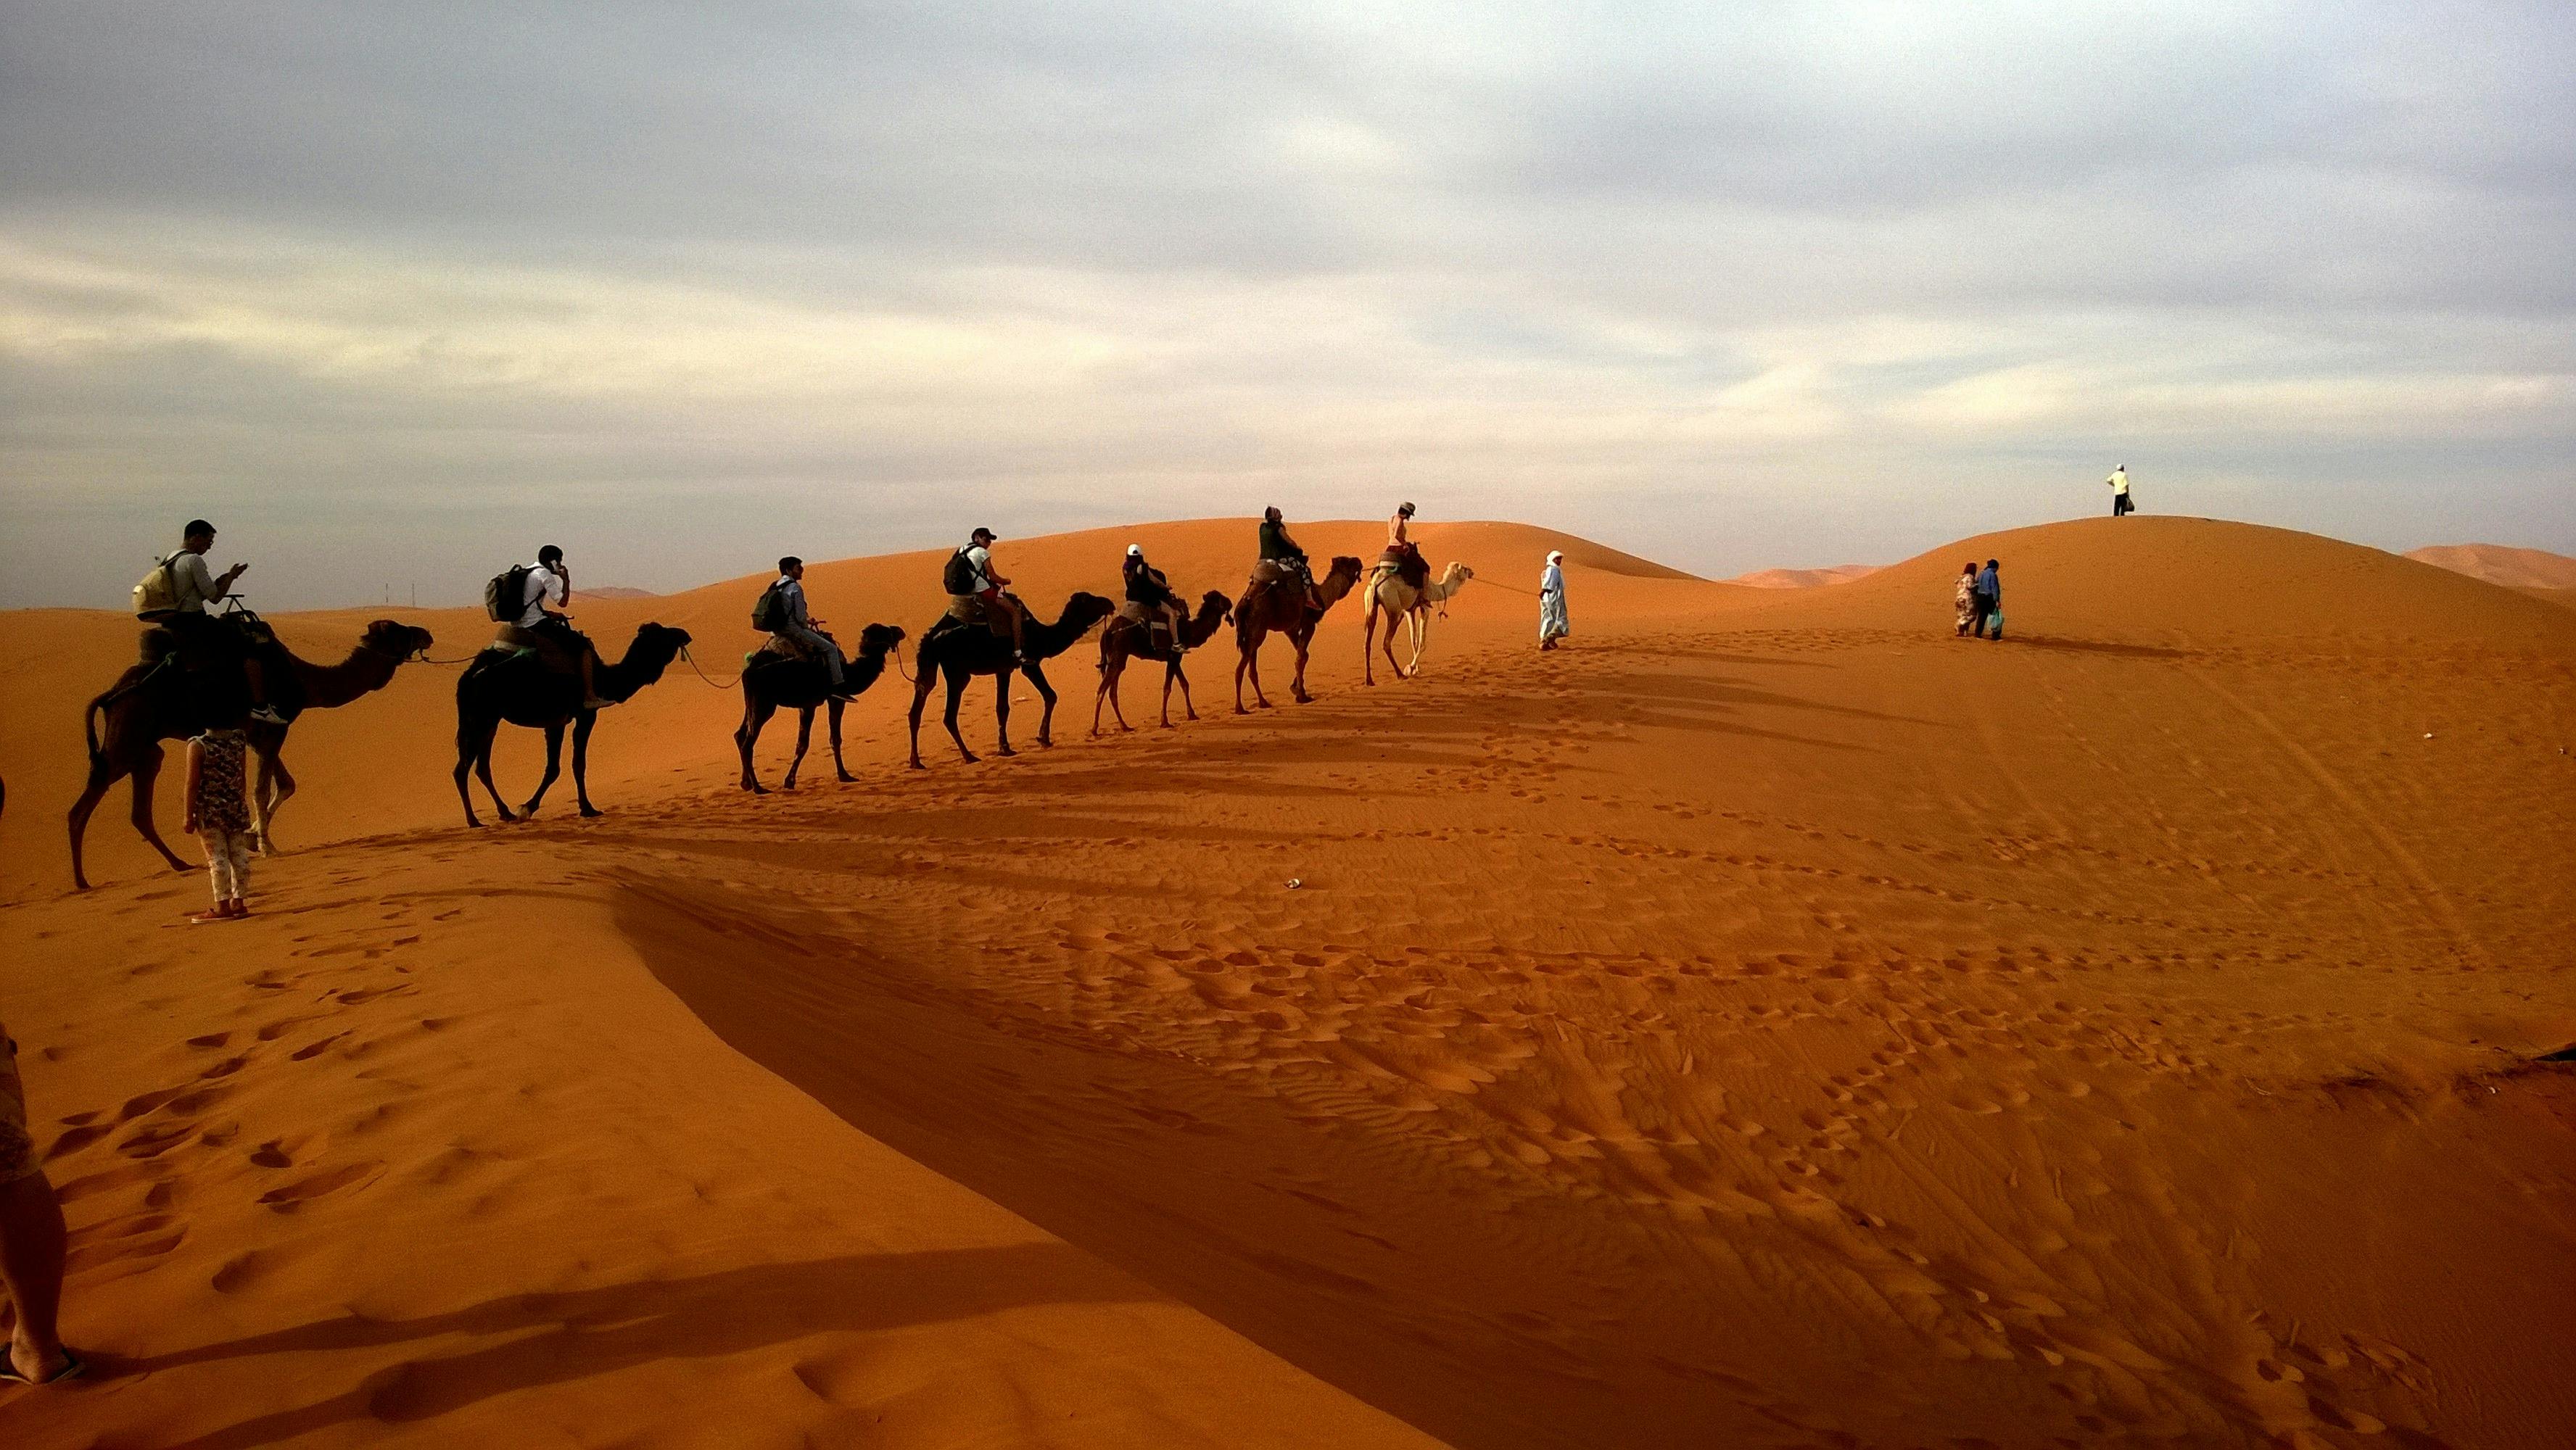 Camel Trekking in the Thar Desert - A Journey Through Time and Sand